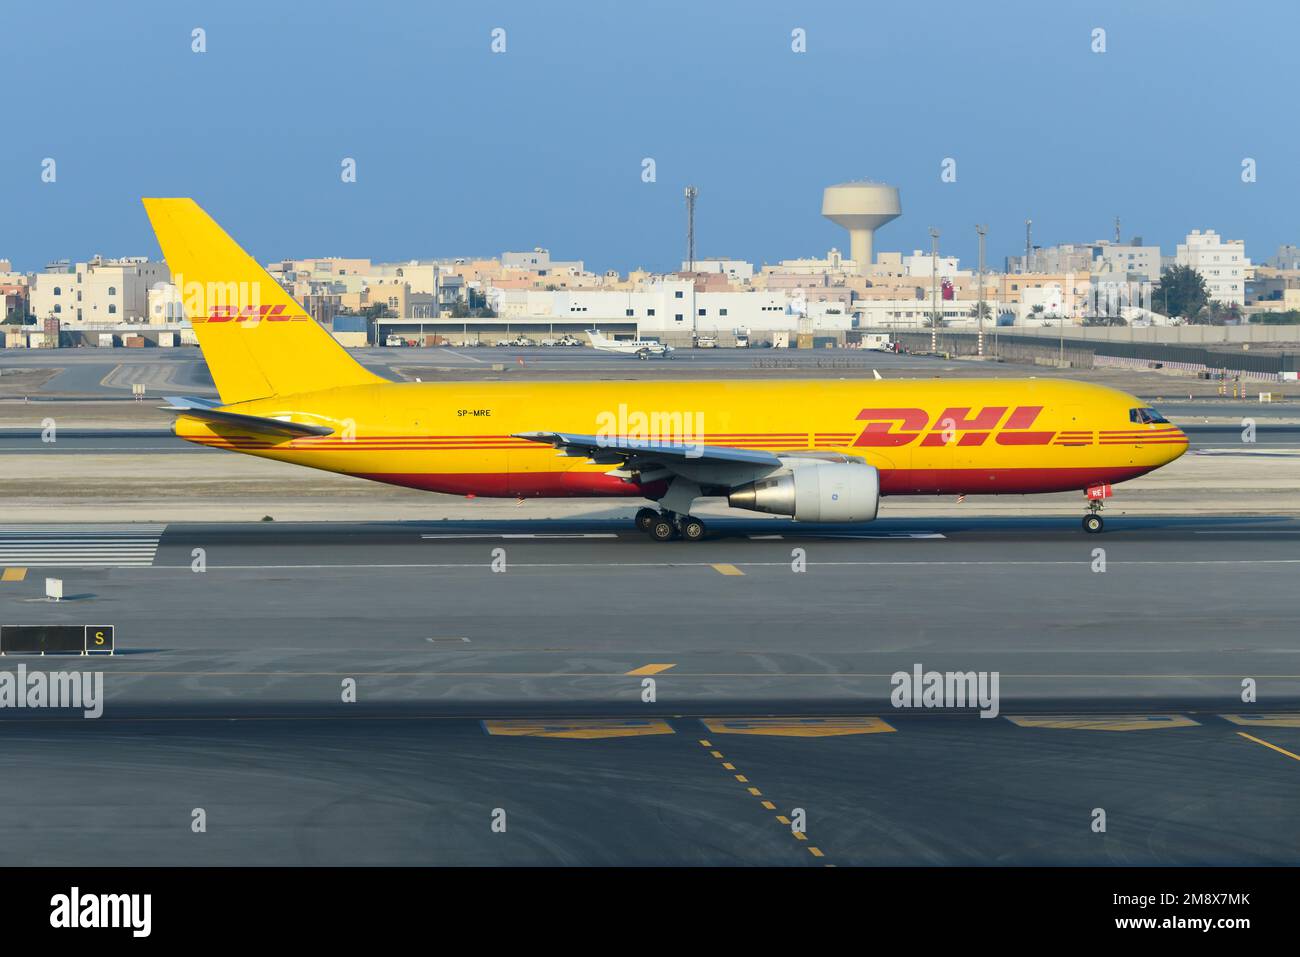 DHL Cargo Boeing 767 cargo aircraft taxiing. Transport of freighter on DHL airplane 767F, also refered as Boeing 767-200BDSF plane. Stock Photo